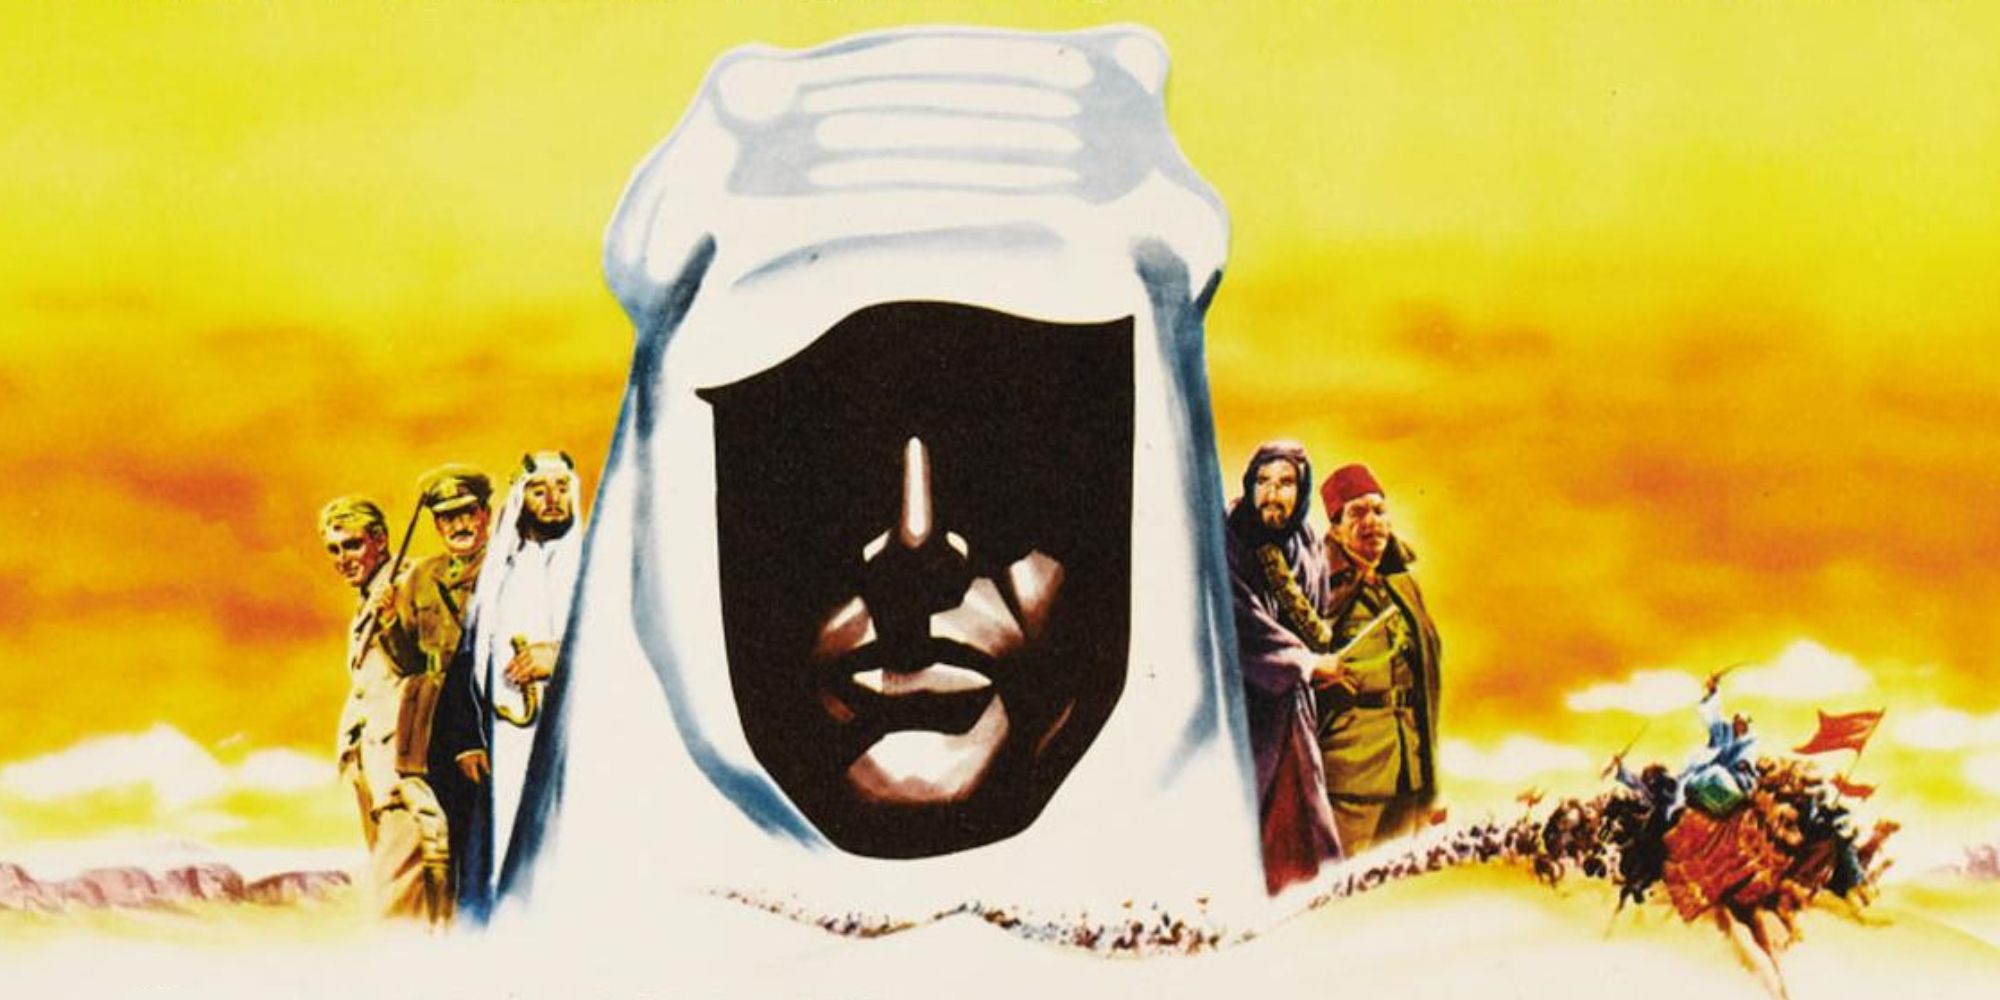 Lawrence of Arabia movie poster with a man's face heavily silhouetted